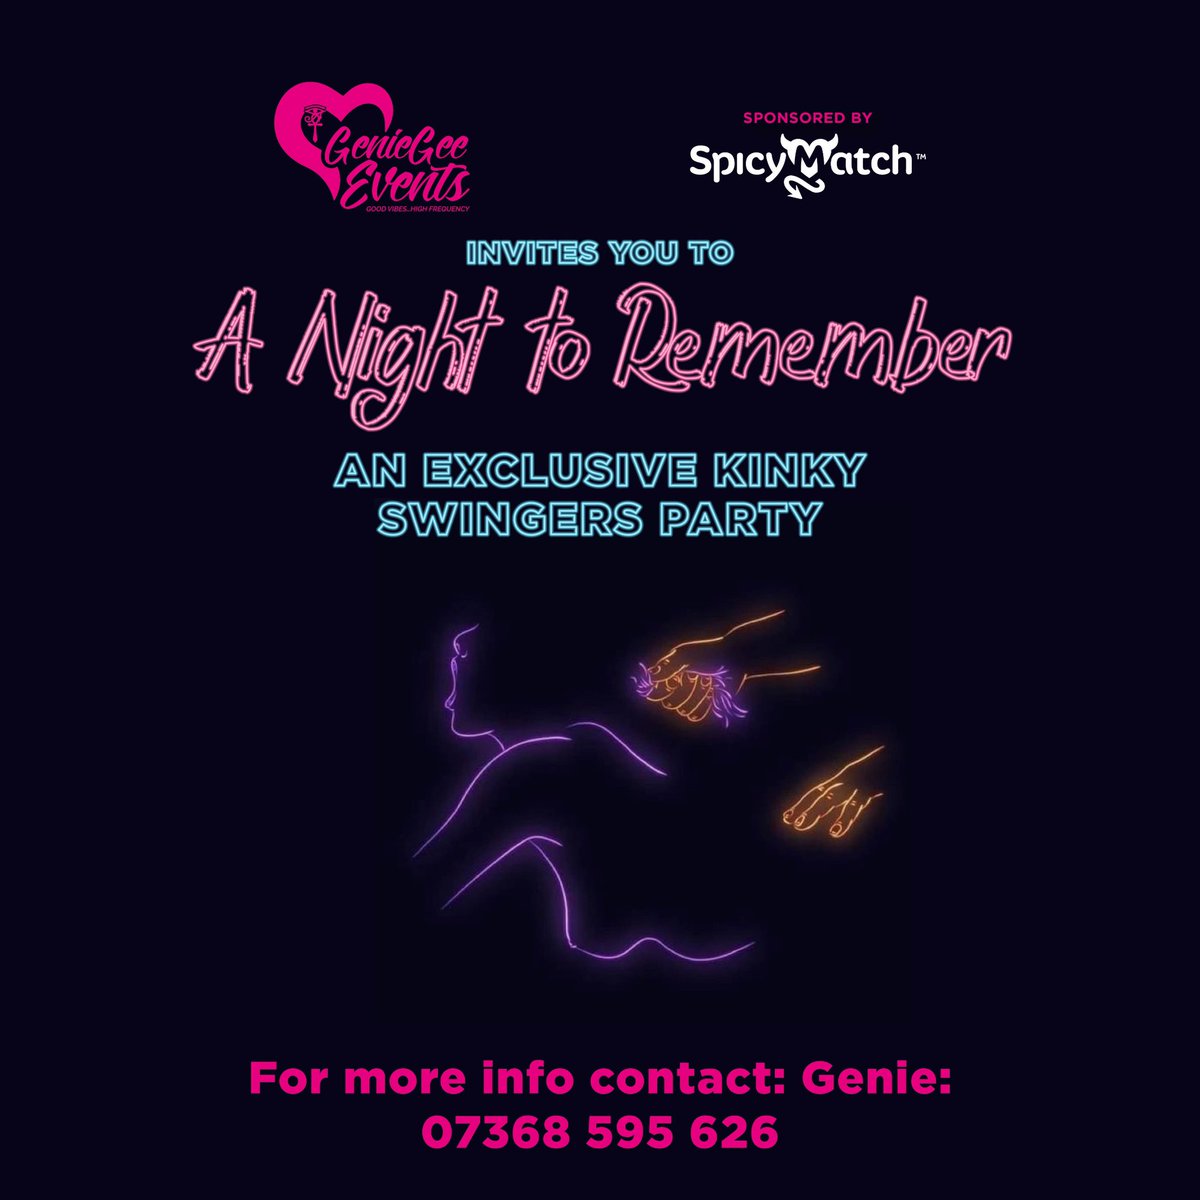 ‘A Night To Remember’ Date: Saturday 25th May Time: 9pm - 4am Location: SW London More details of what’s on offer at this event to follow…. Tickets will be released on Monday at 9pm! Limited Earlybird discount tickets available!! Sponsored by SpicyMatch.com